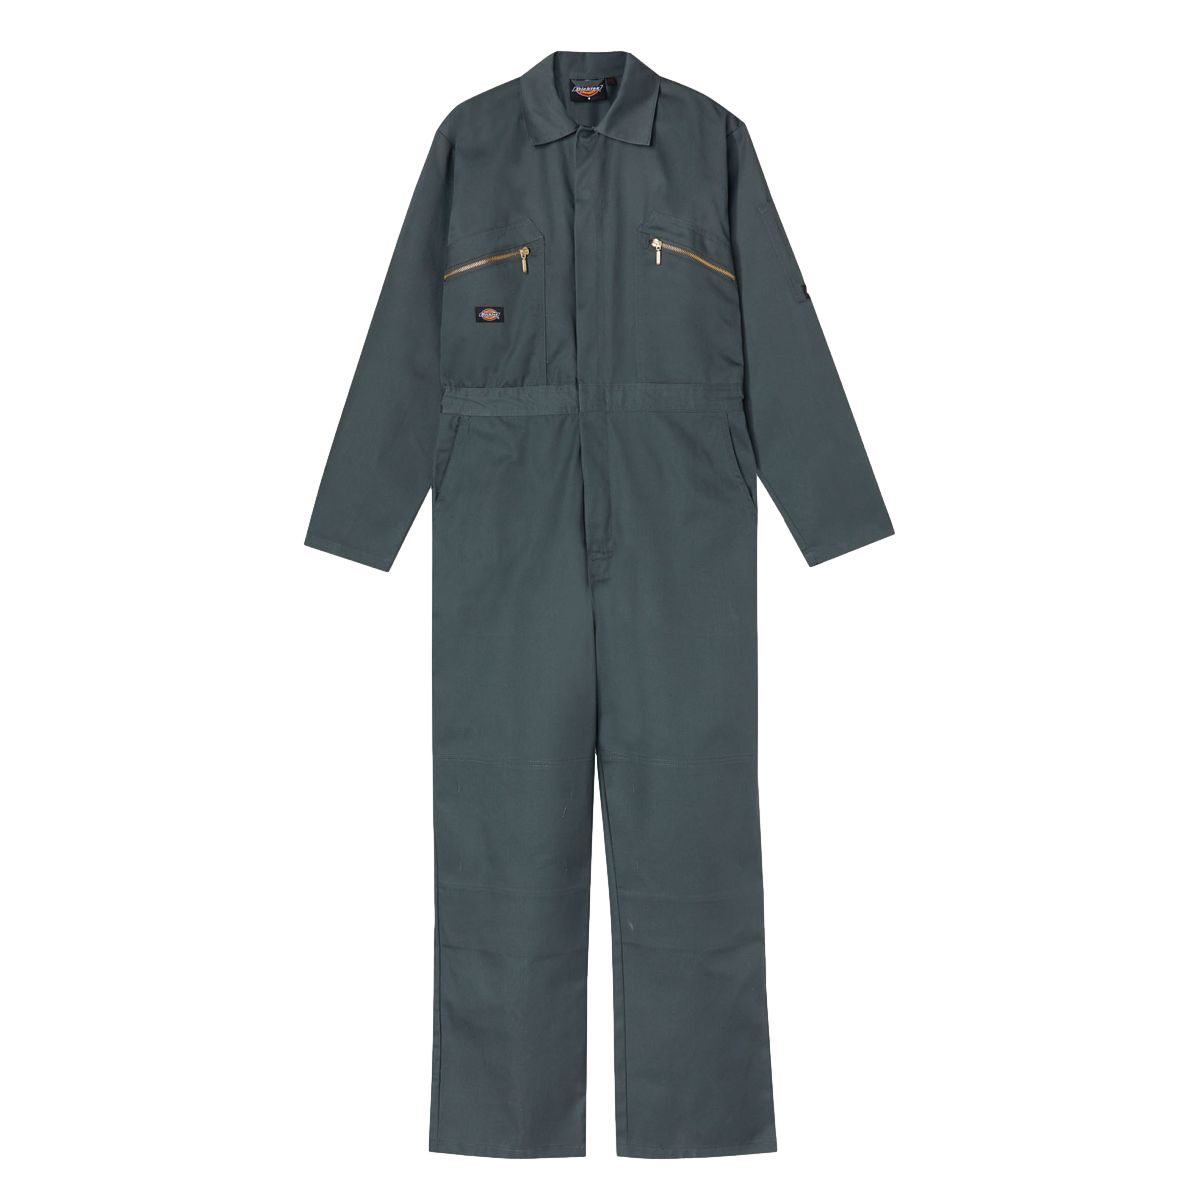 Combinaison Redhawk Coverhall Vert - Dickies - Taille 3XL 0